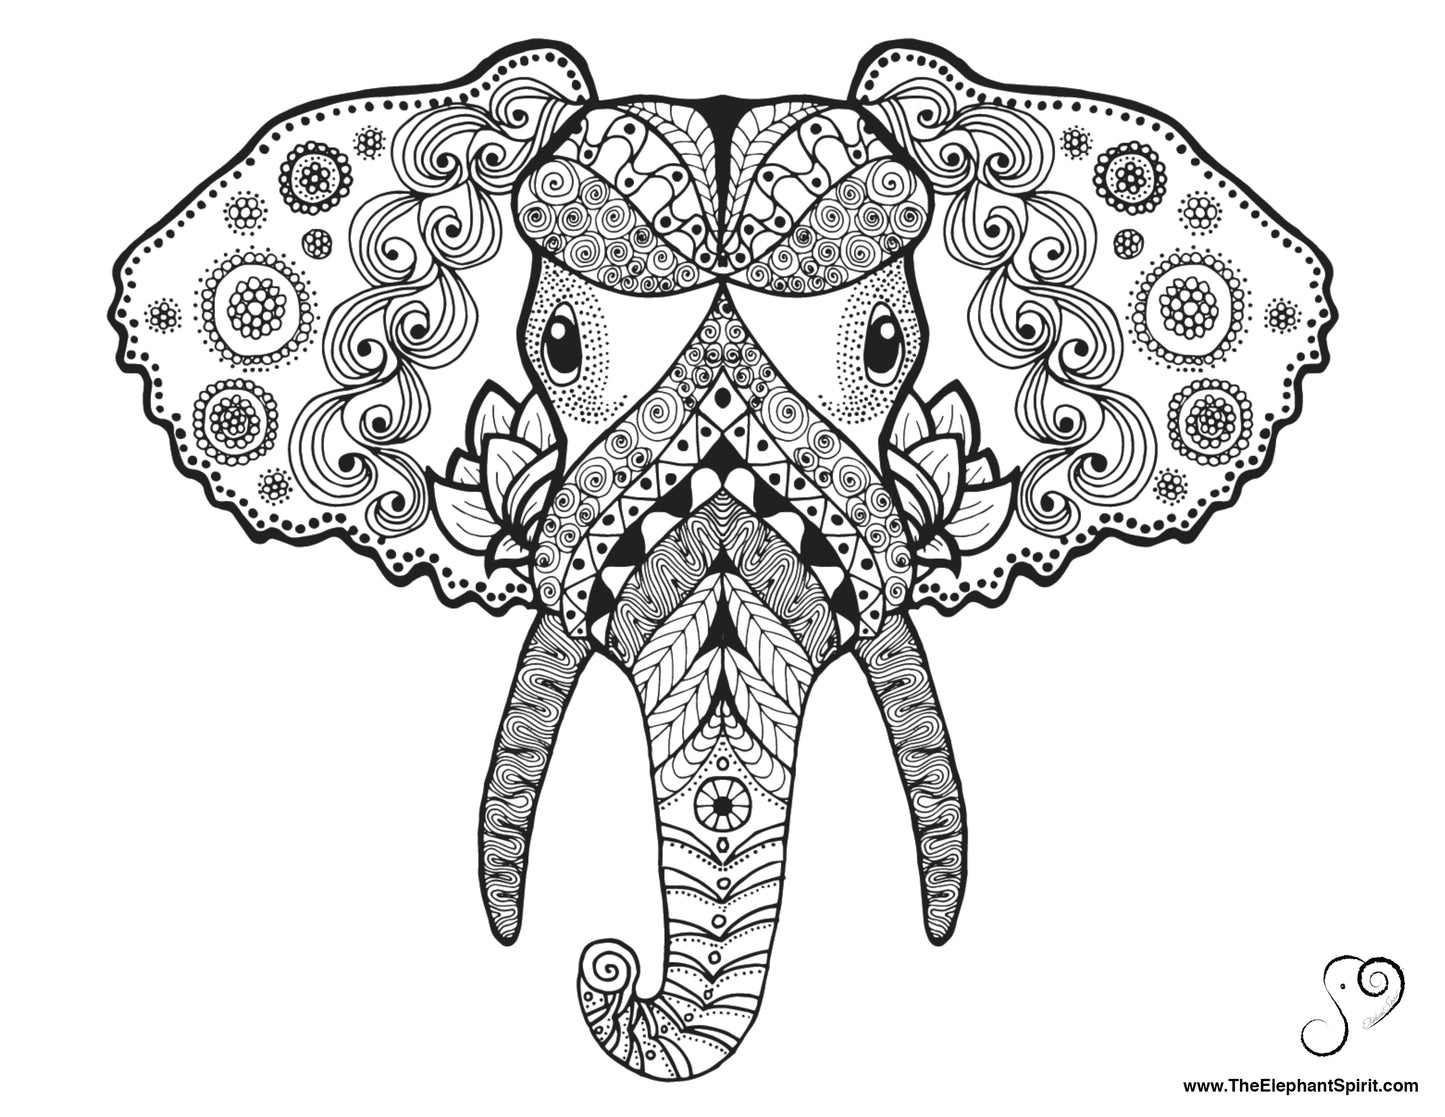 FREE Coloring Page 06-23